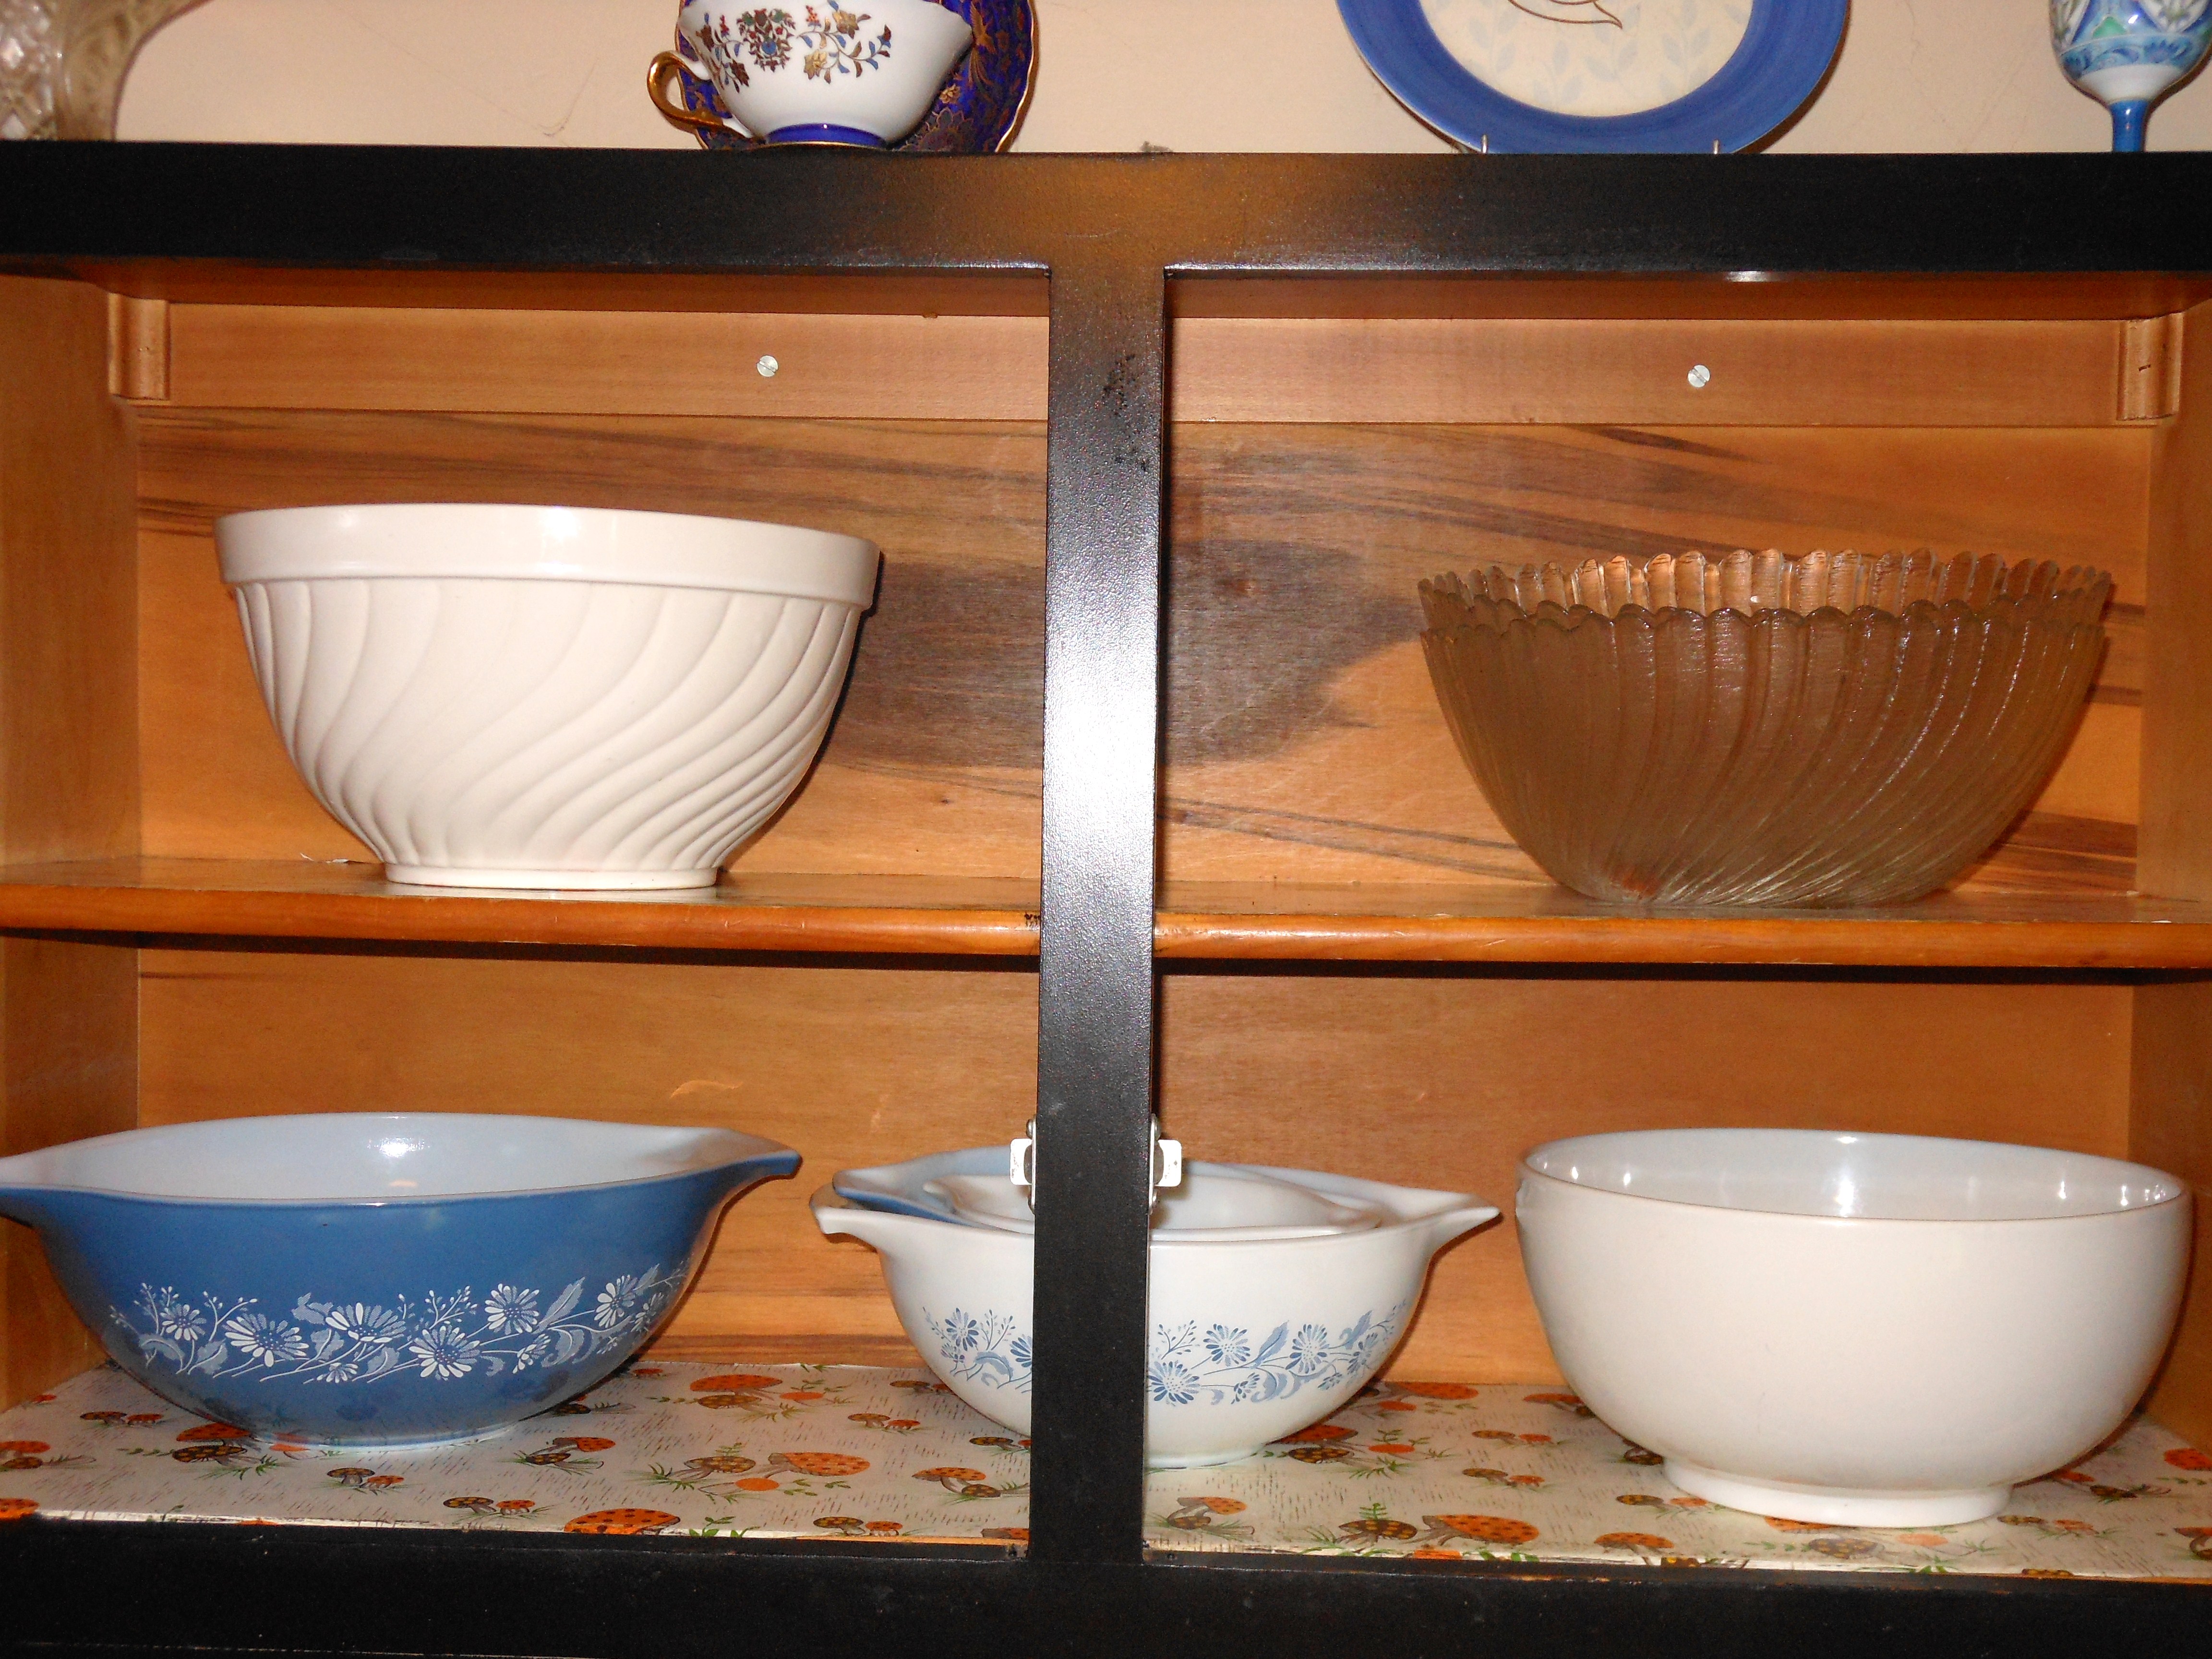 Photo of dishware in overhead cabinet